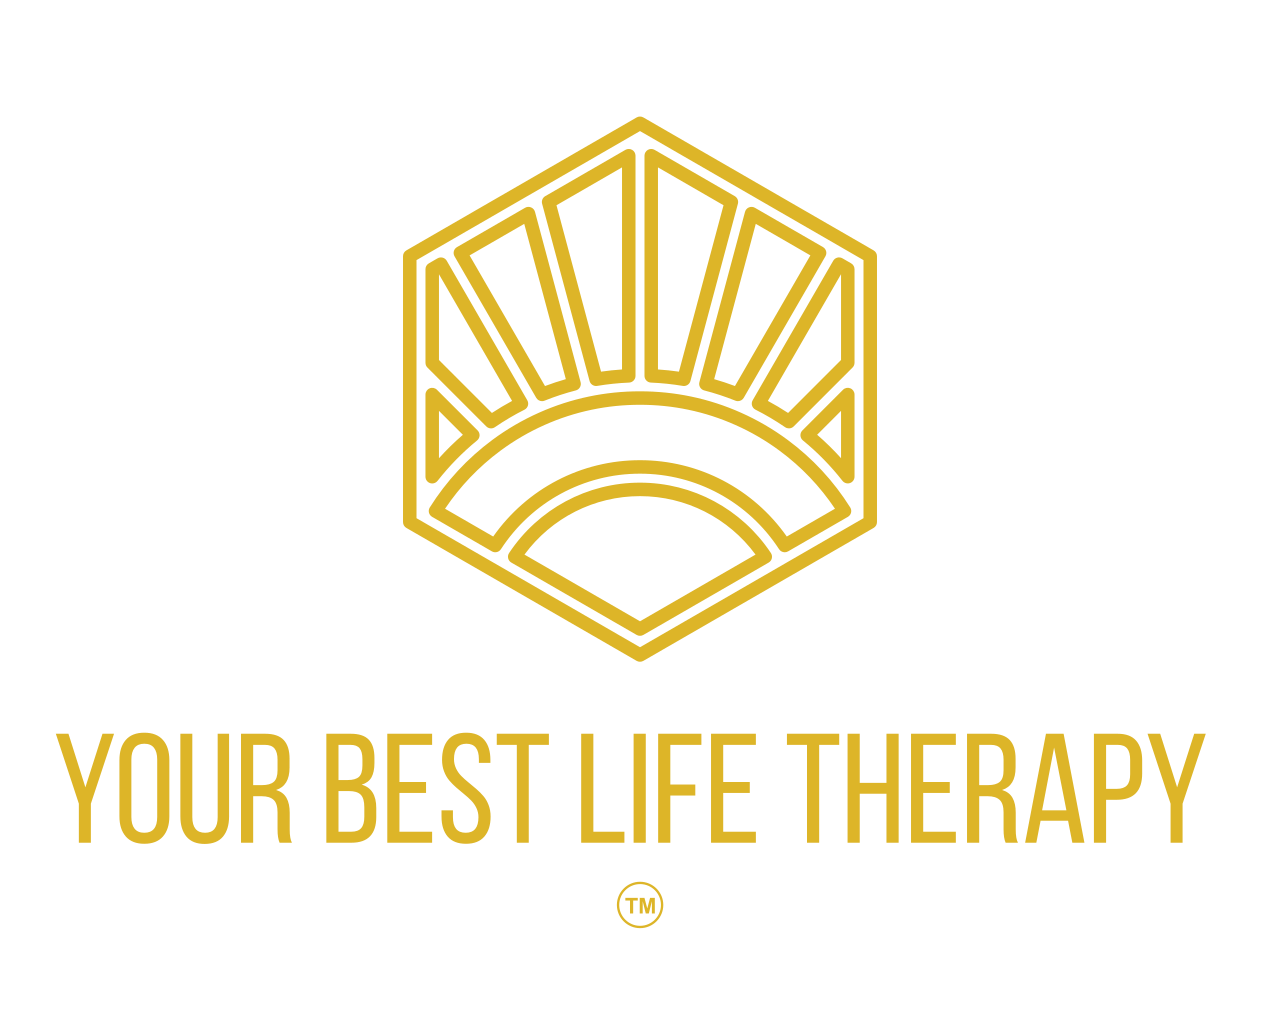 Your Best Life Therapy